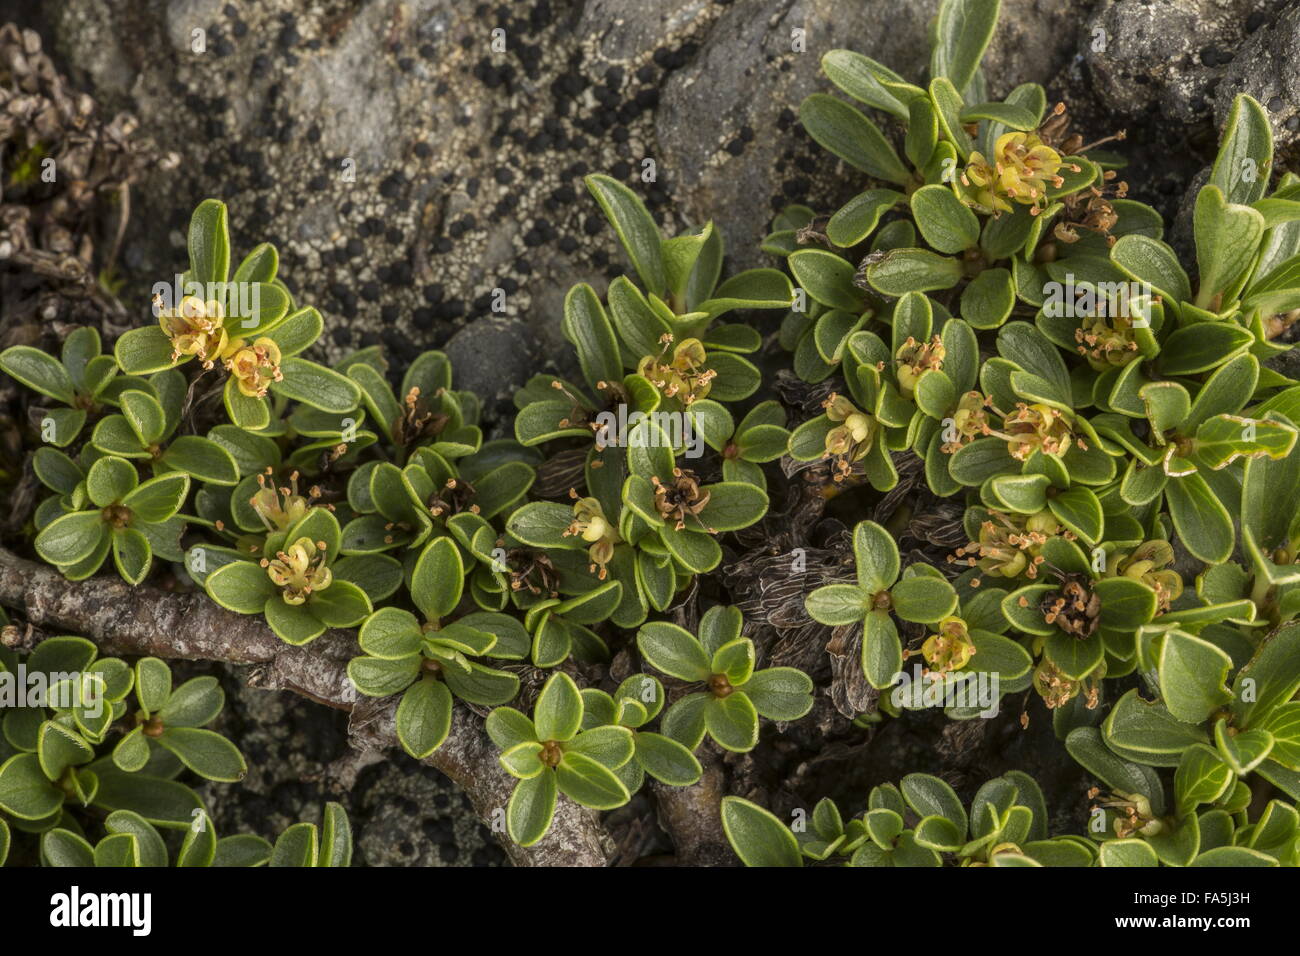 Thyme-leaved willow, Salix serpyllifolia with male flowers; tiny high-altitude shrub, Swiss alps. Stock Photo